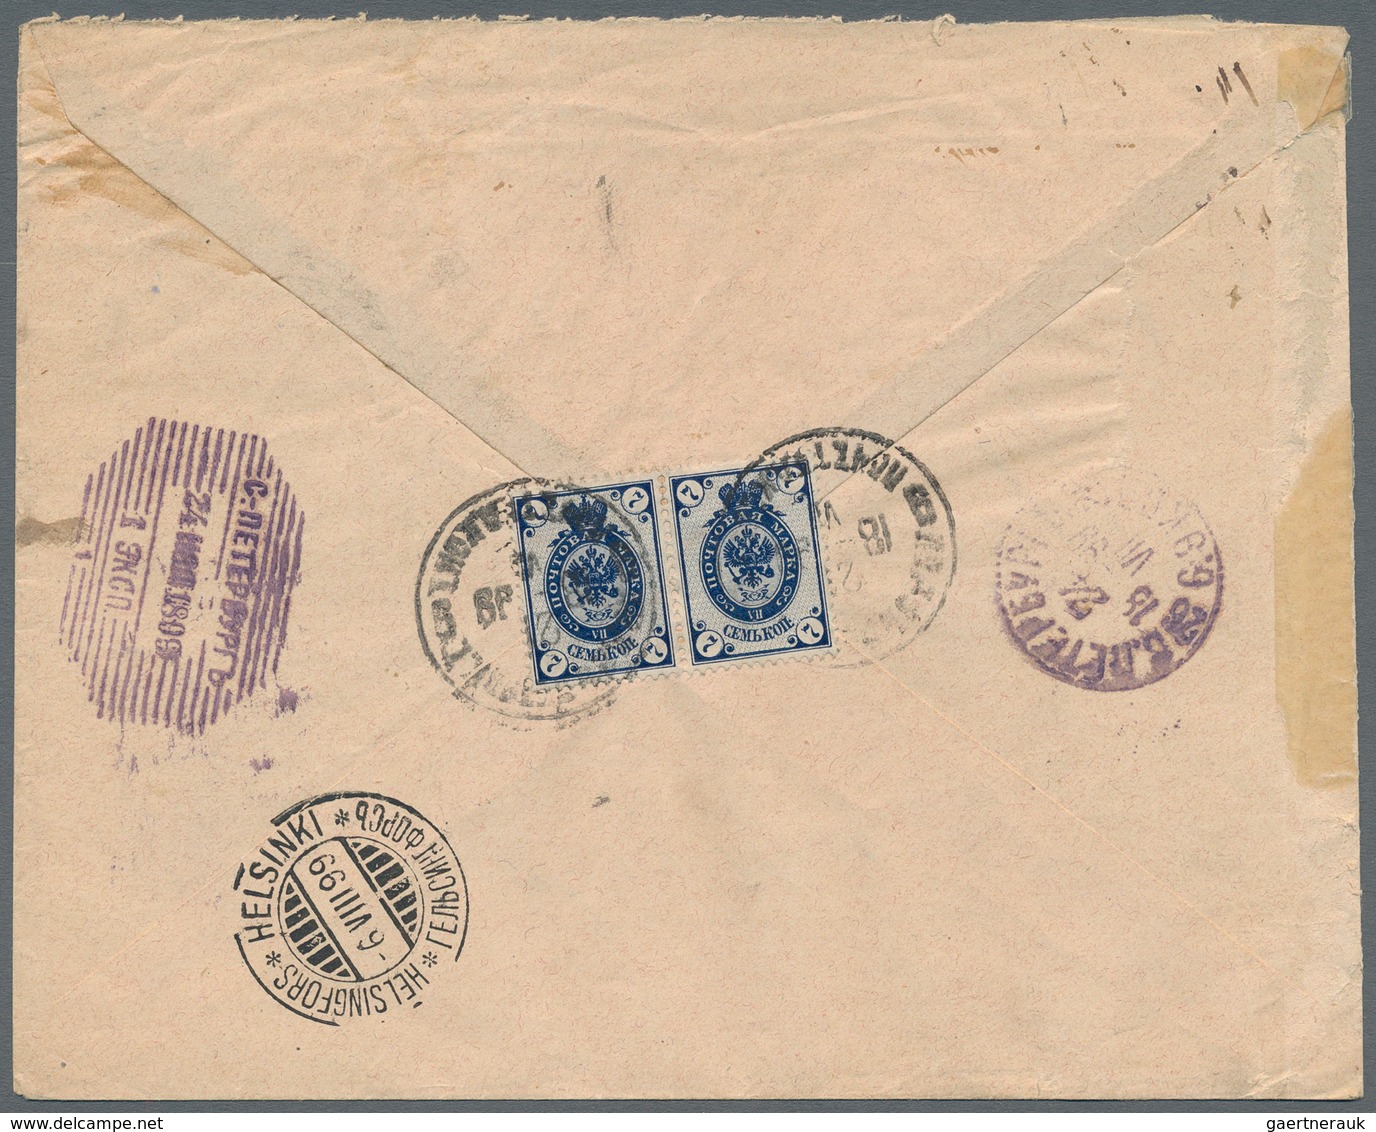 Russland: 1899 four covers all sent by registered mail from Buguruslan, Lodz (Poland), Ryazan and So